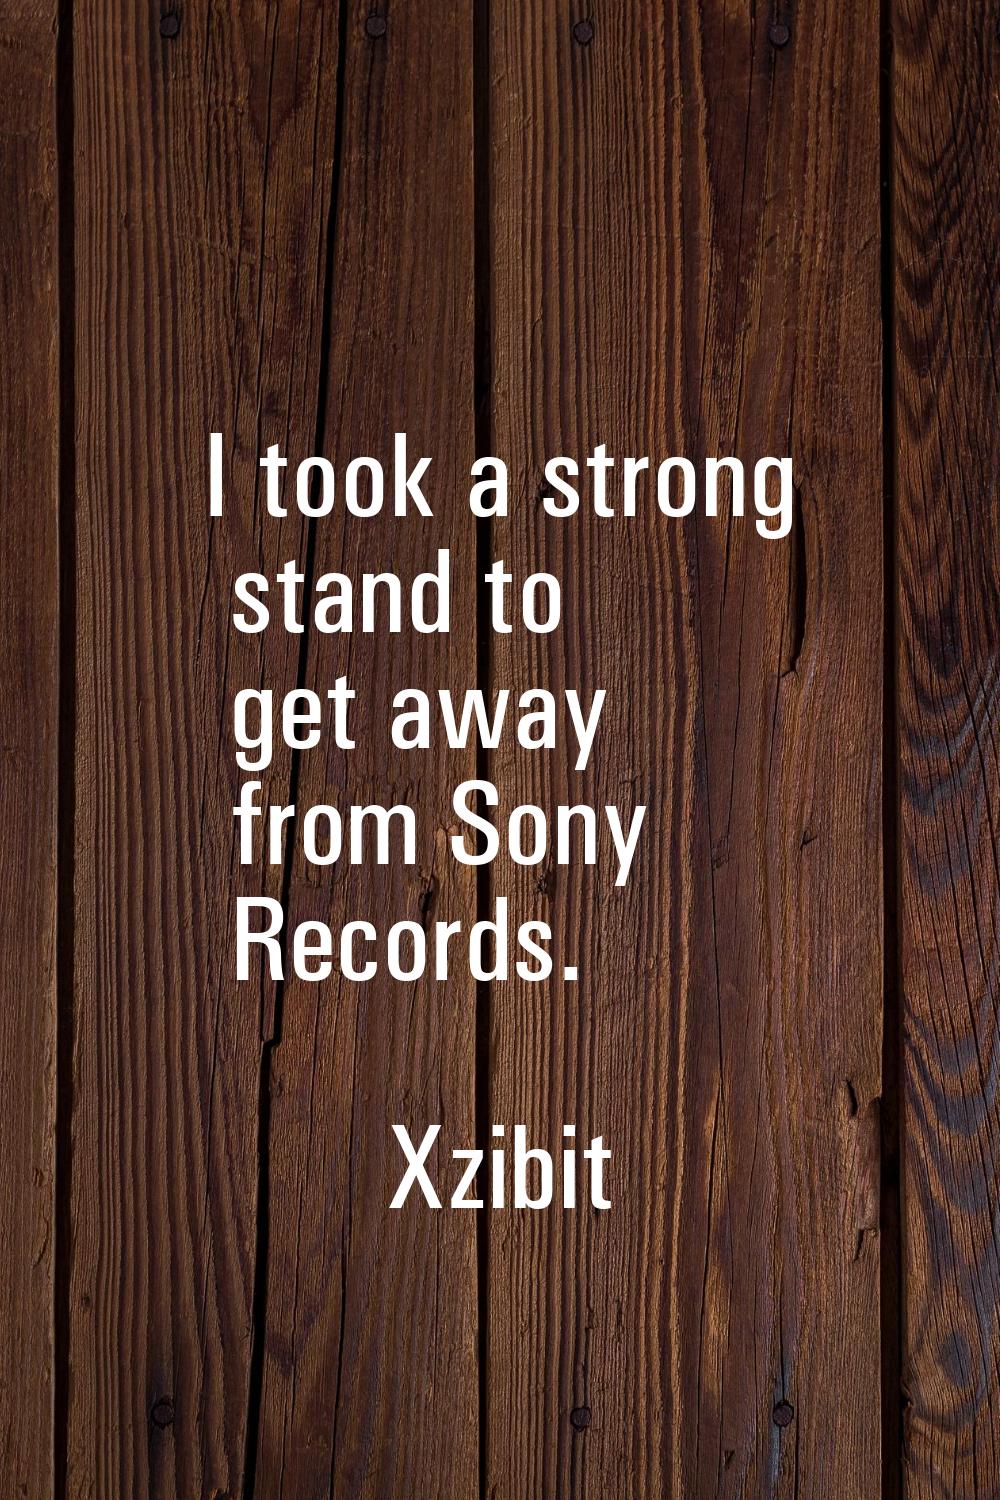 I took a strong stand to get away from Sony Records.